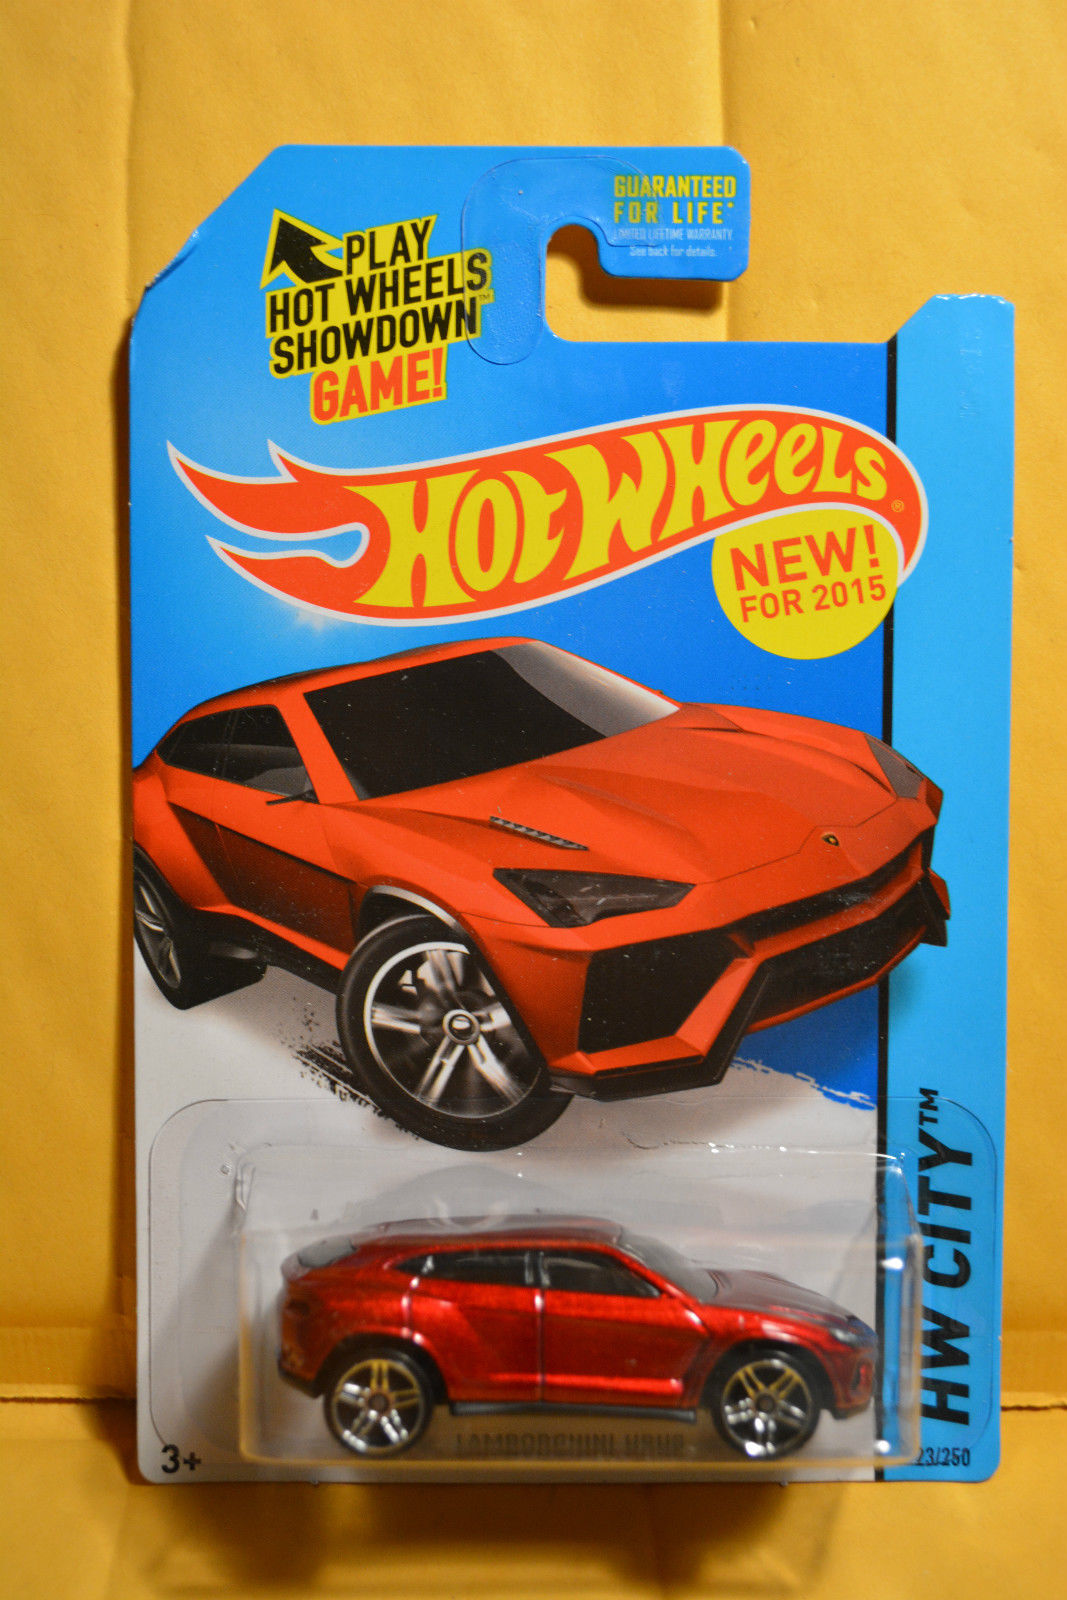 2015 023 Hall's Guide for Hot Wheels Collectors